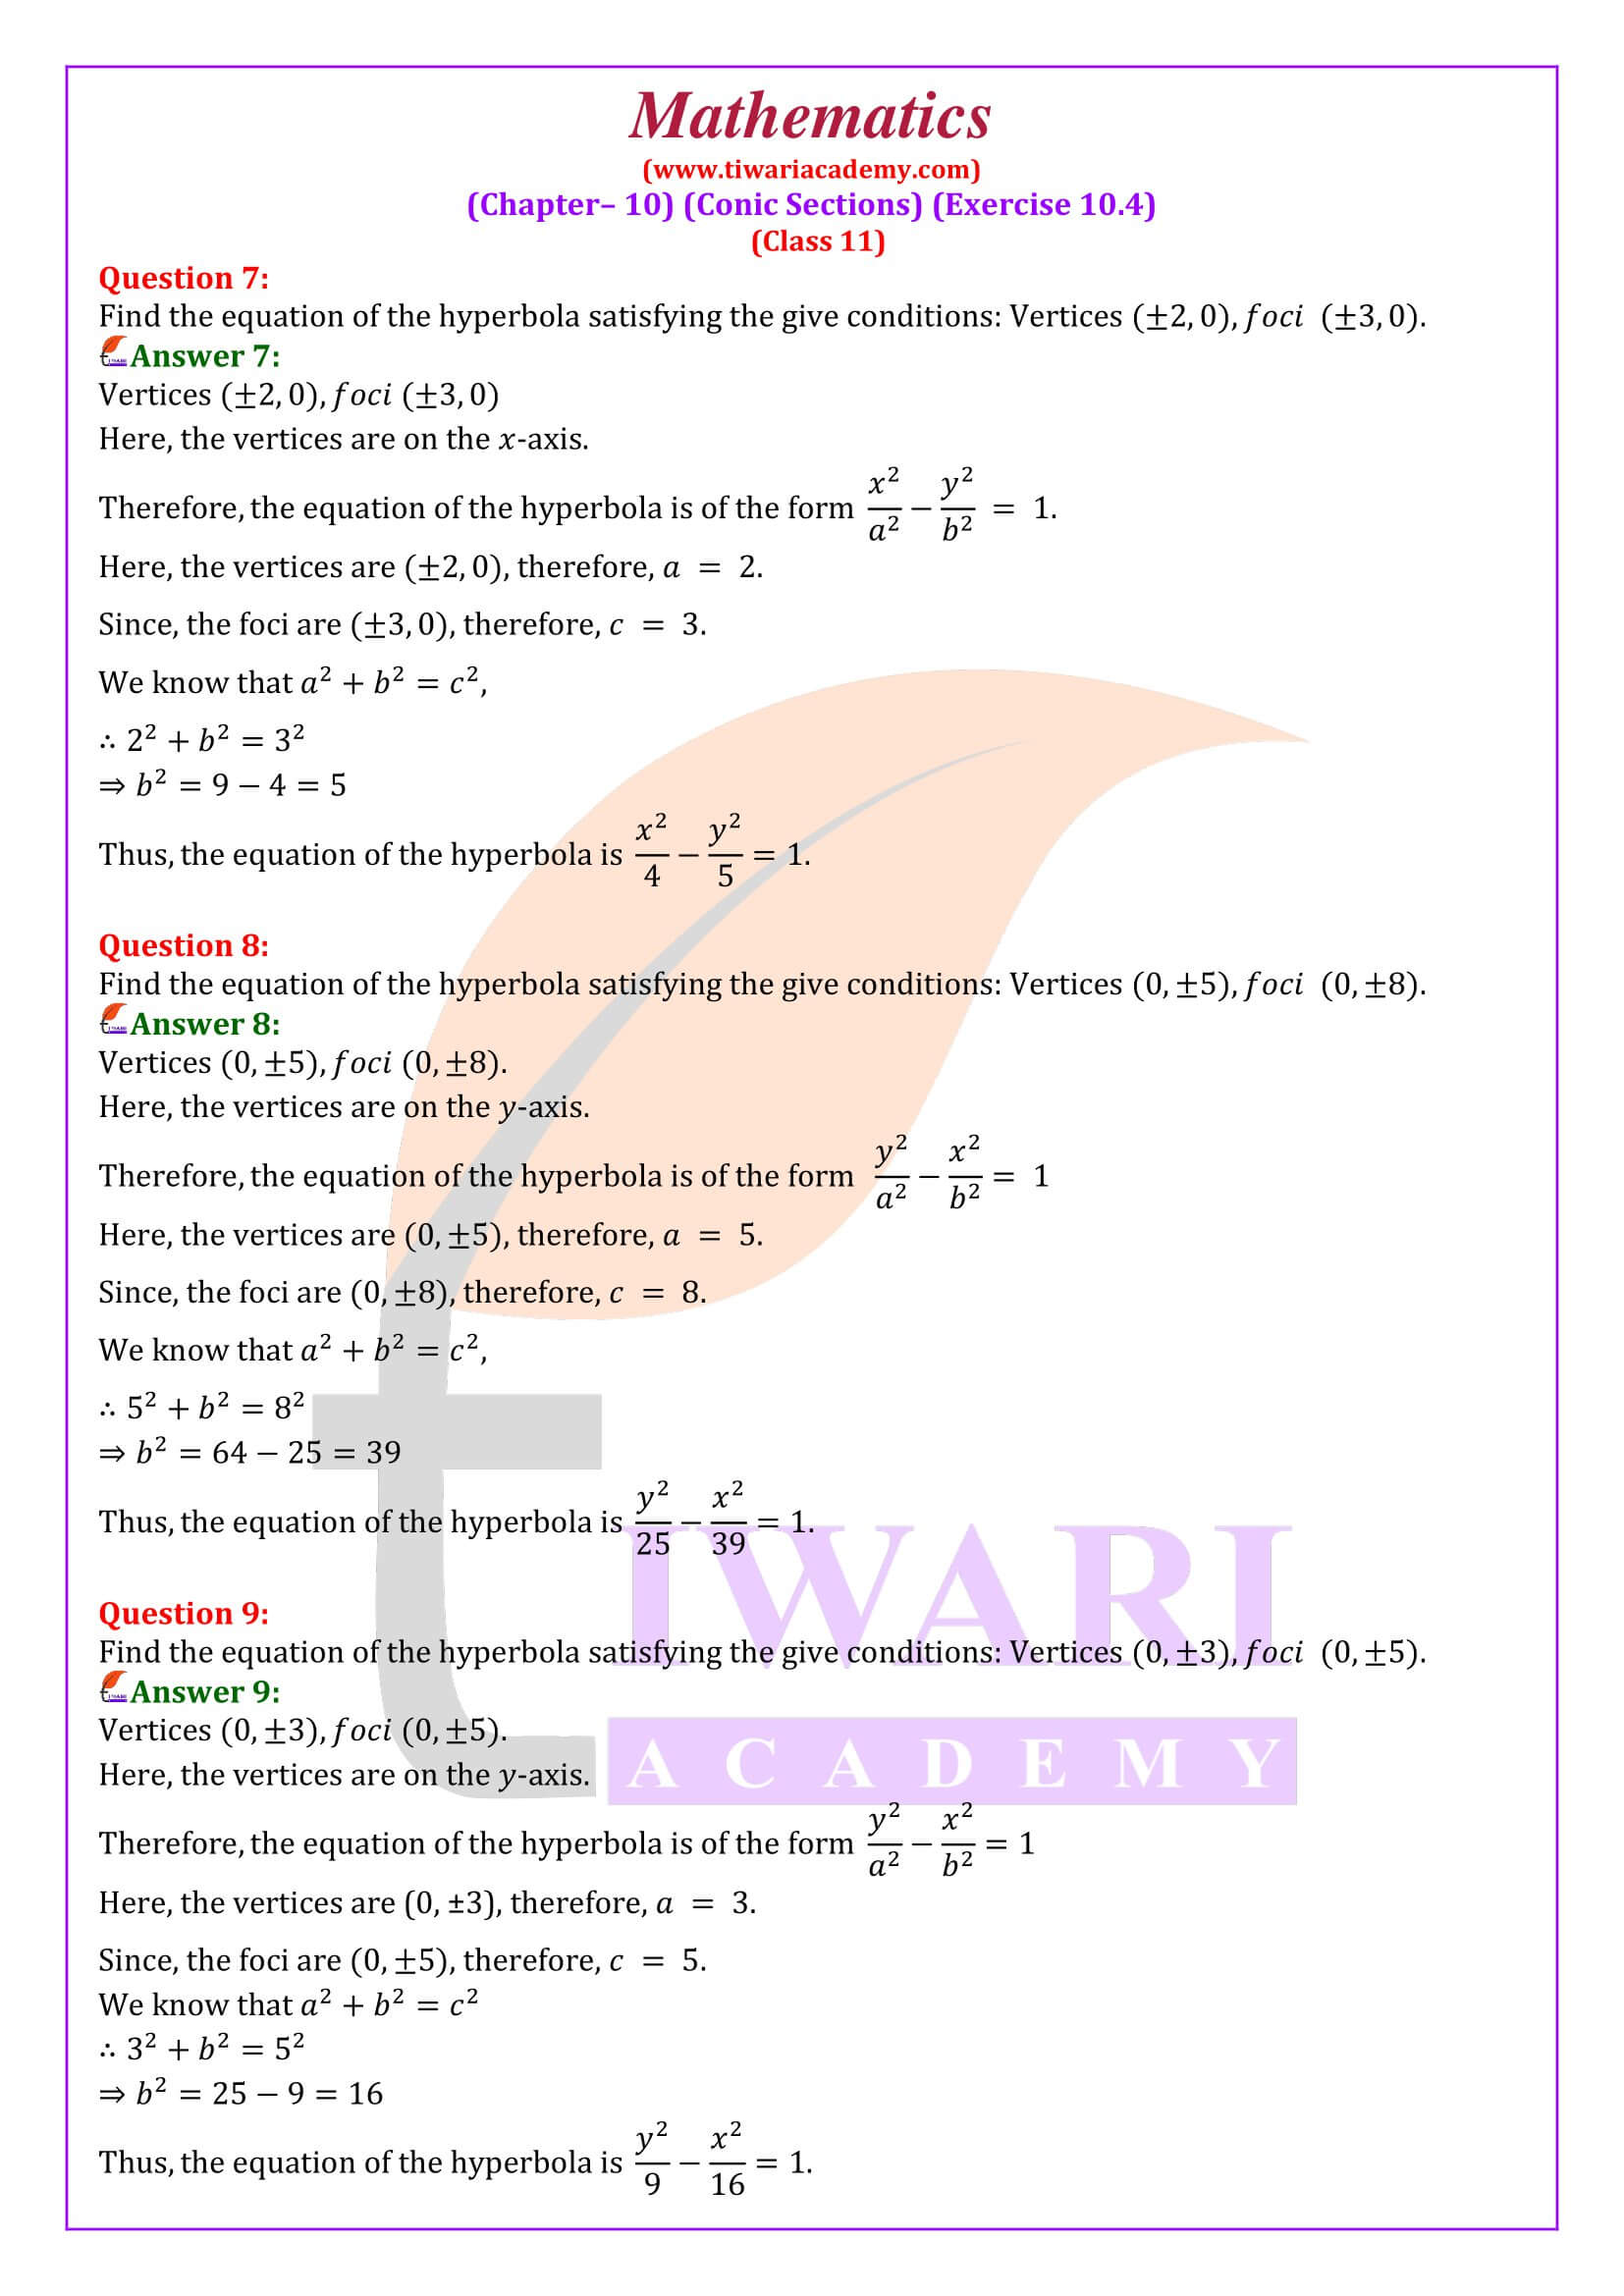 Class 11 Maths Chapter 10 Exercise 10.4 solutions in English